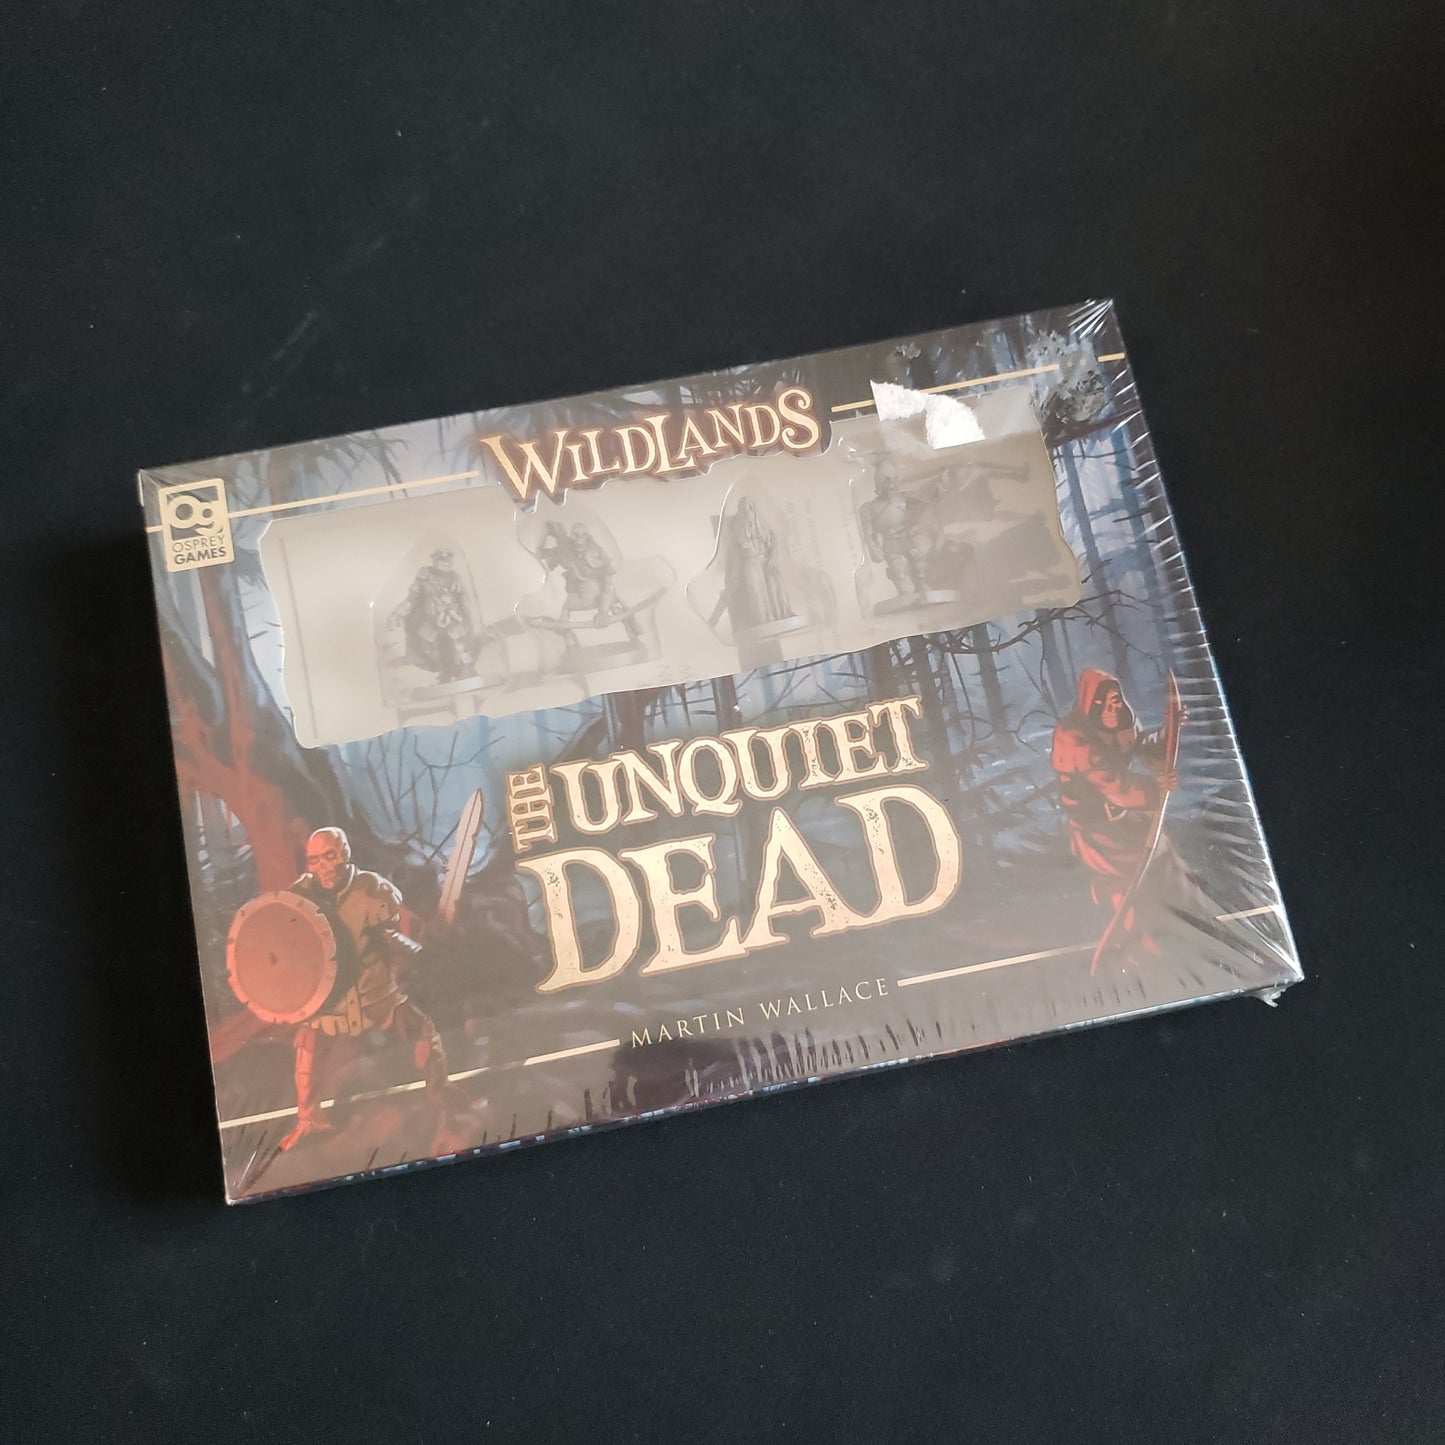 Image shows the front cover of the box of the Unquiet Dead expansion for the Wildlands board game